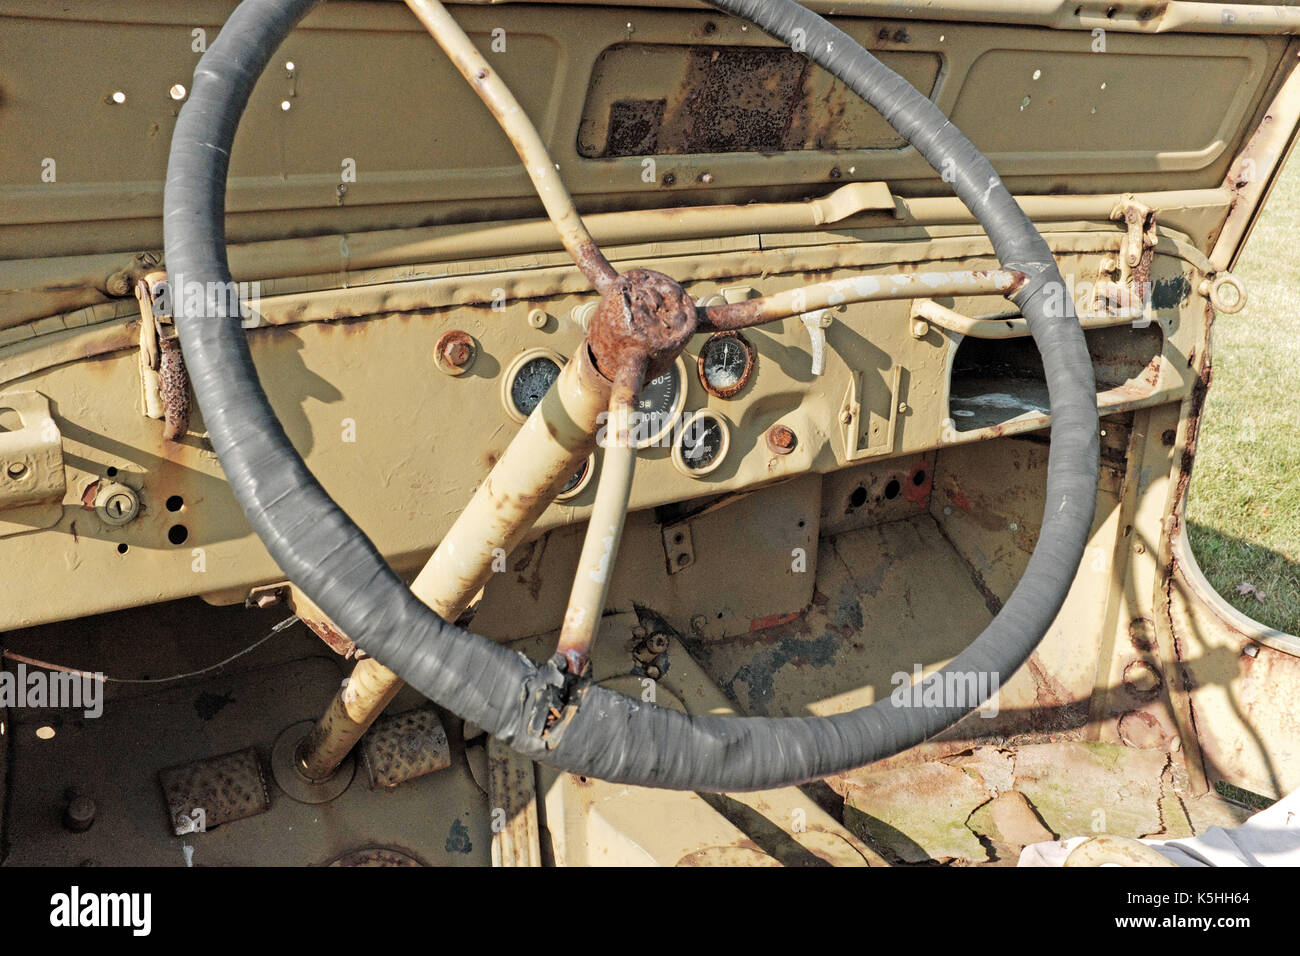 Vintage military jeep open front cabin, dashboard, and steering wheel showing their rust from the elements. Stock Photo